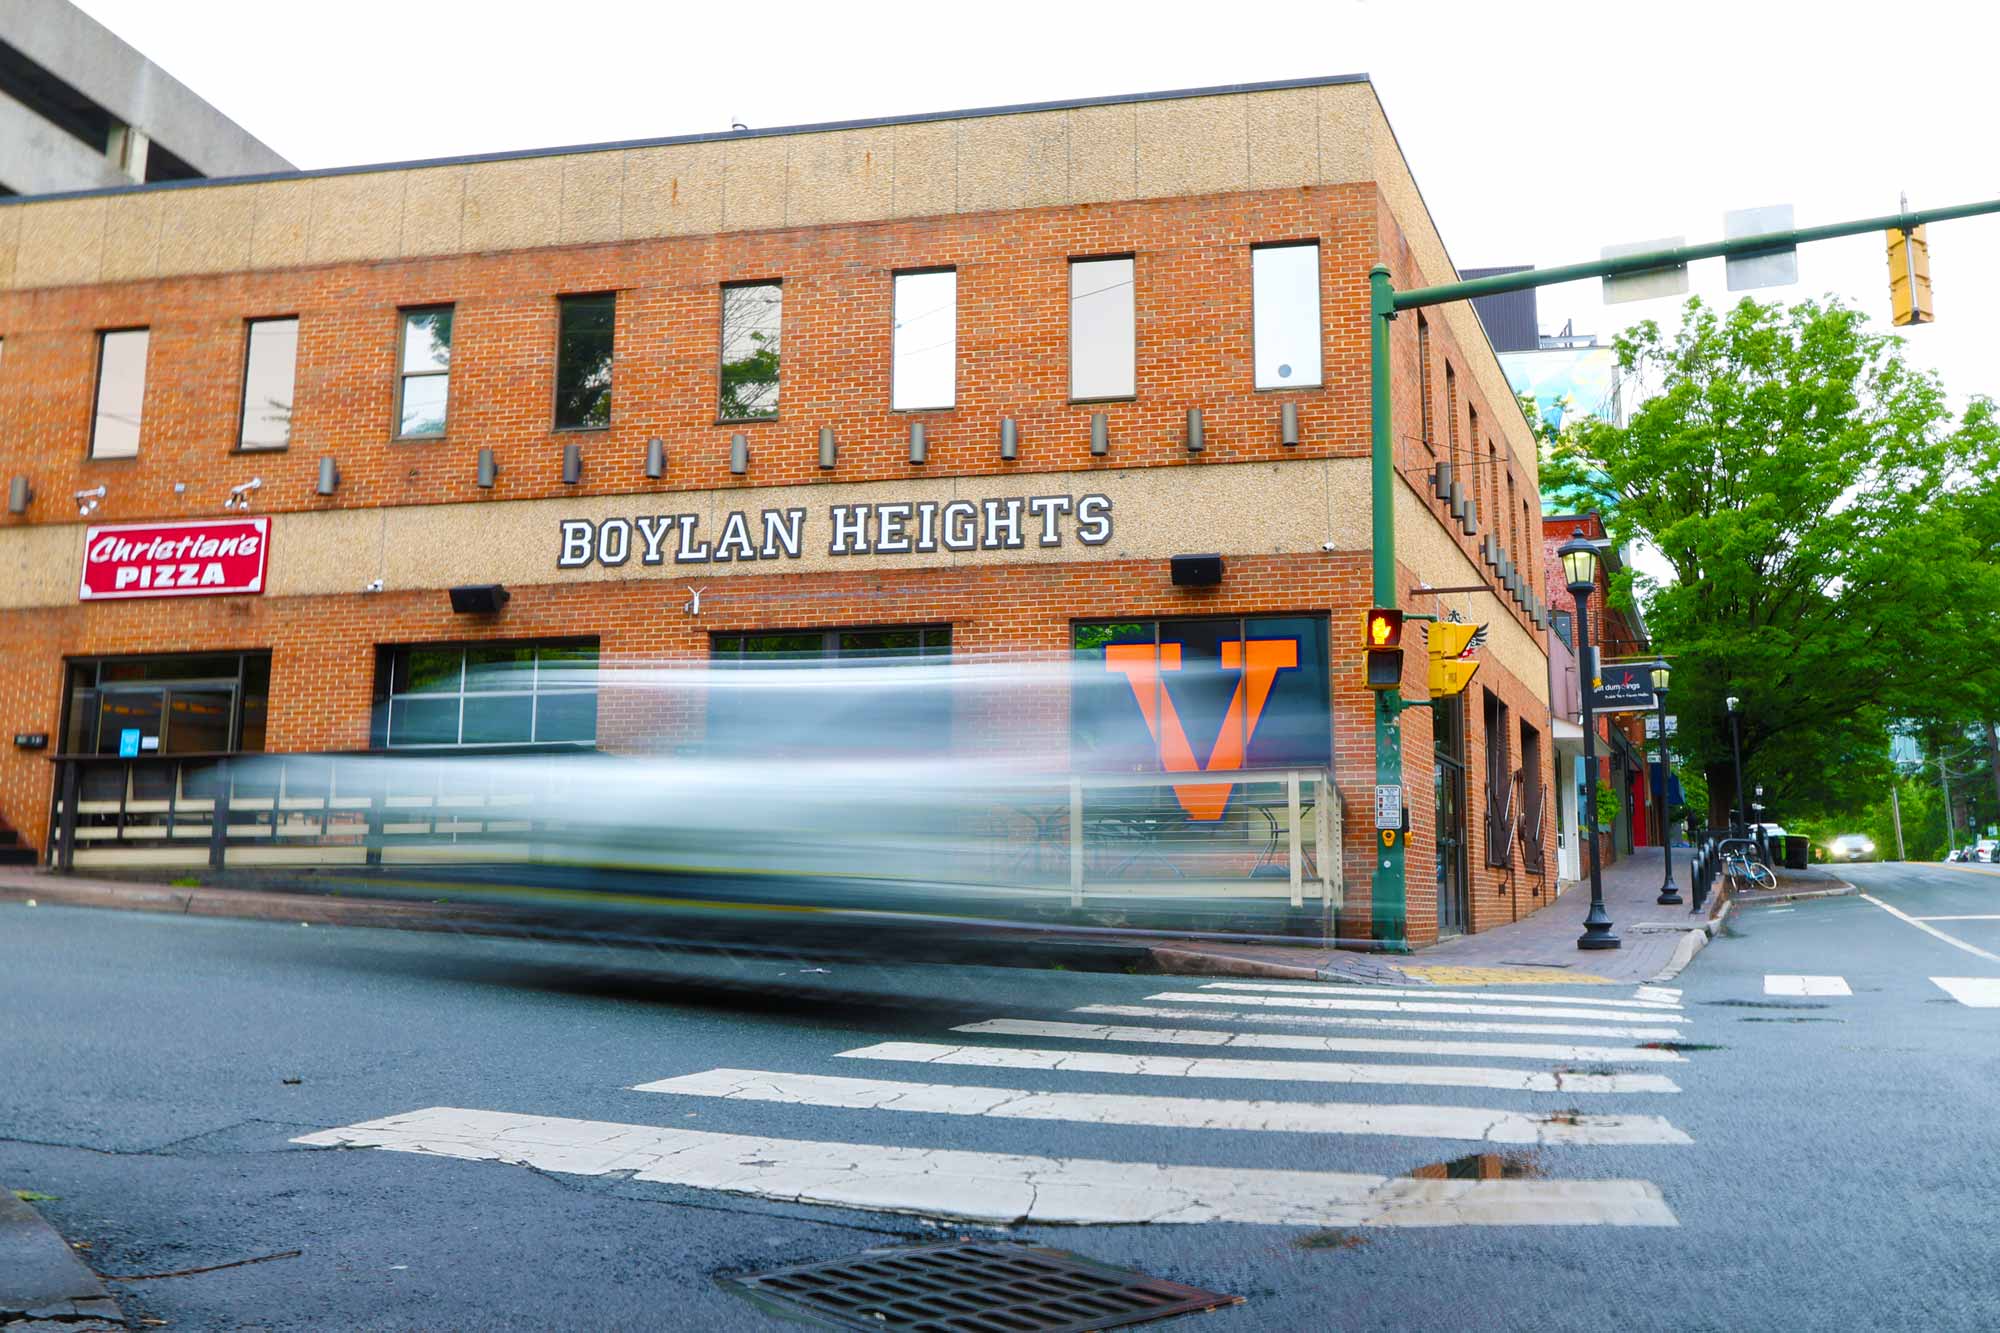 A blurred car moves by the big V logo in front of the Boylan Heights building